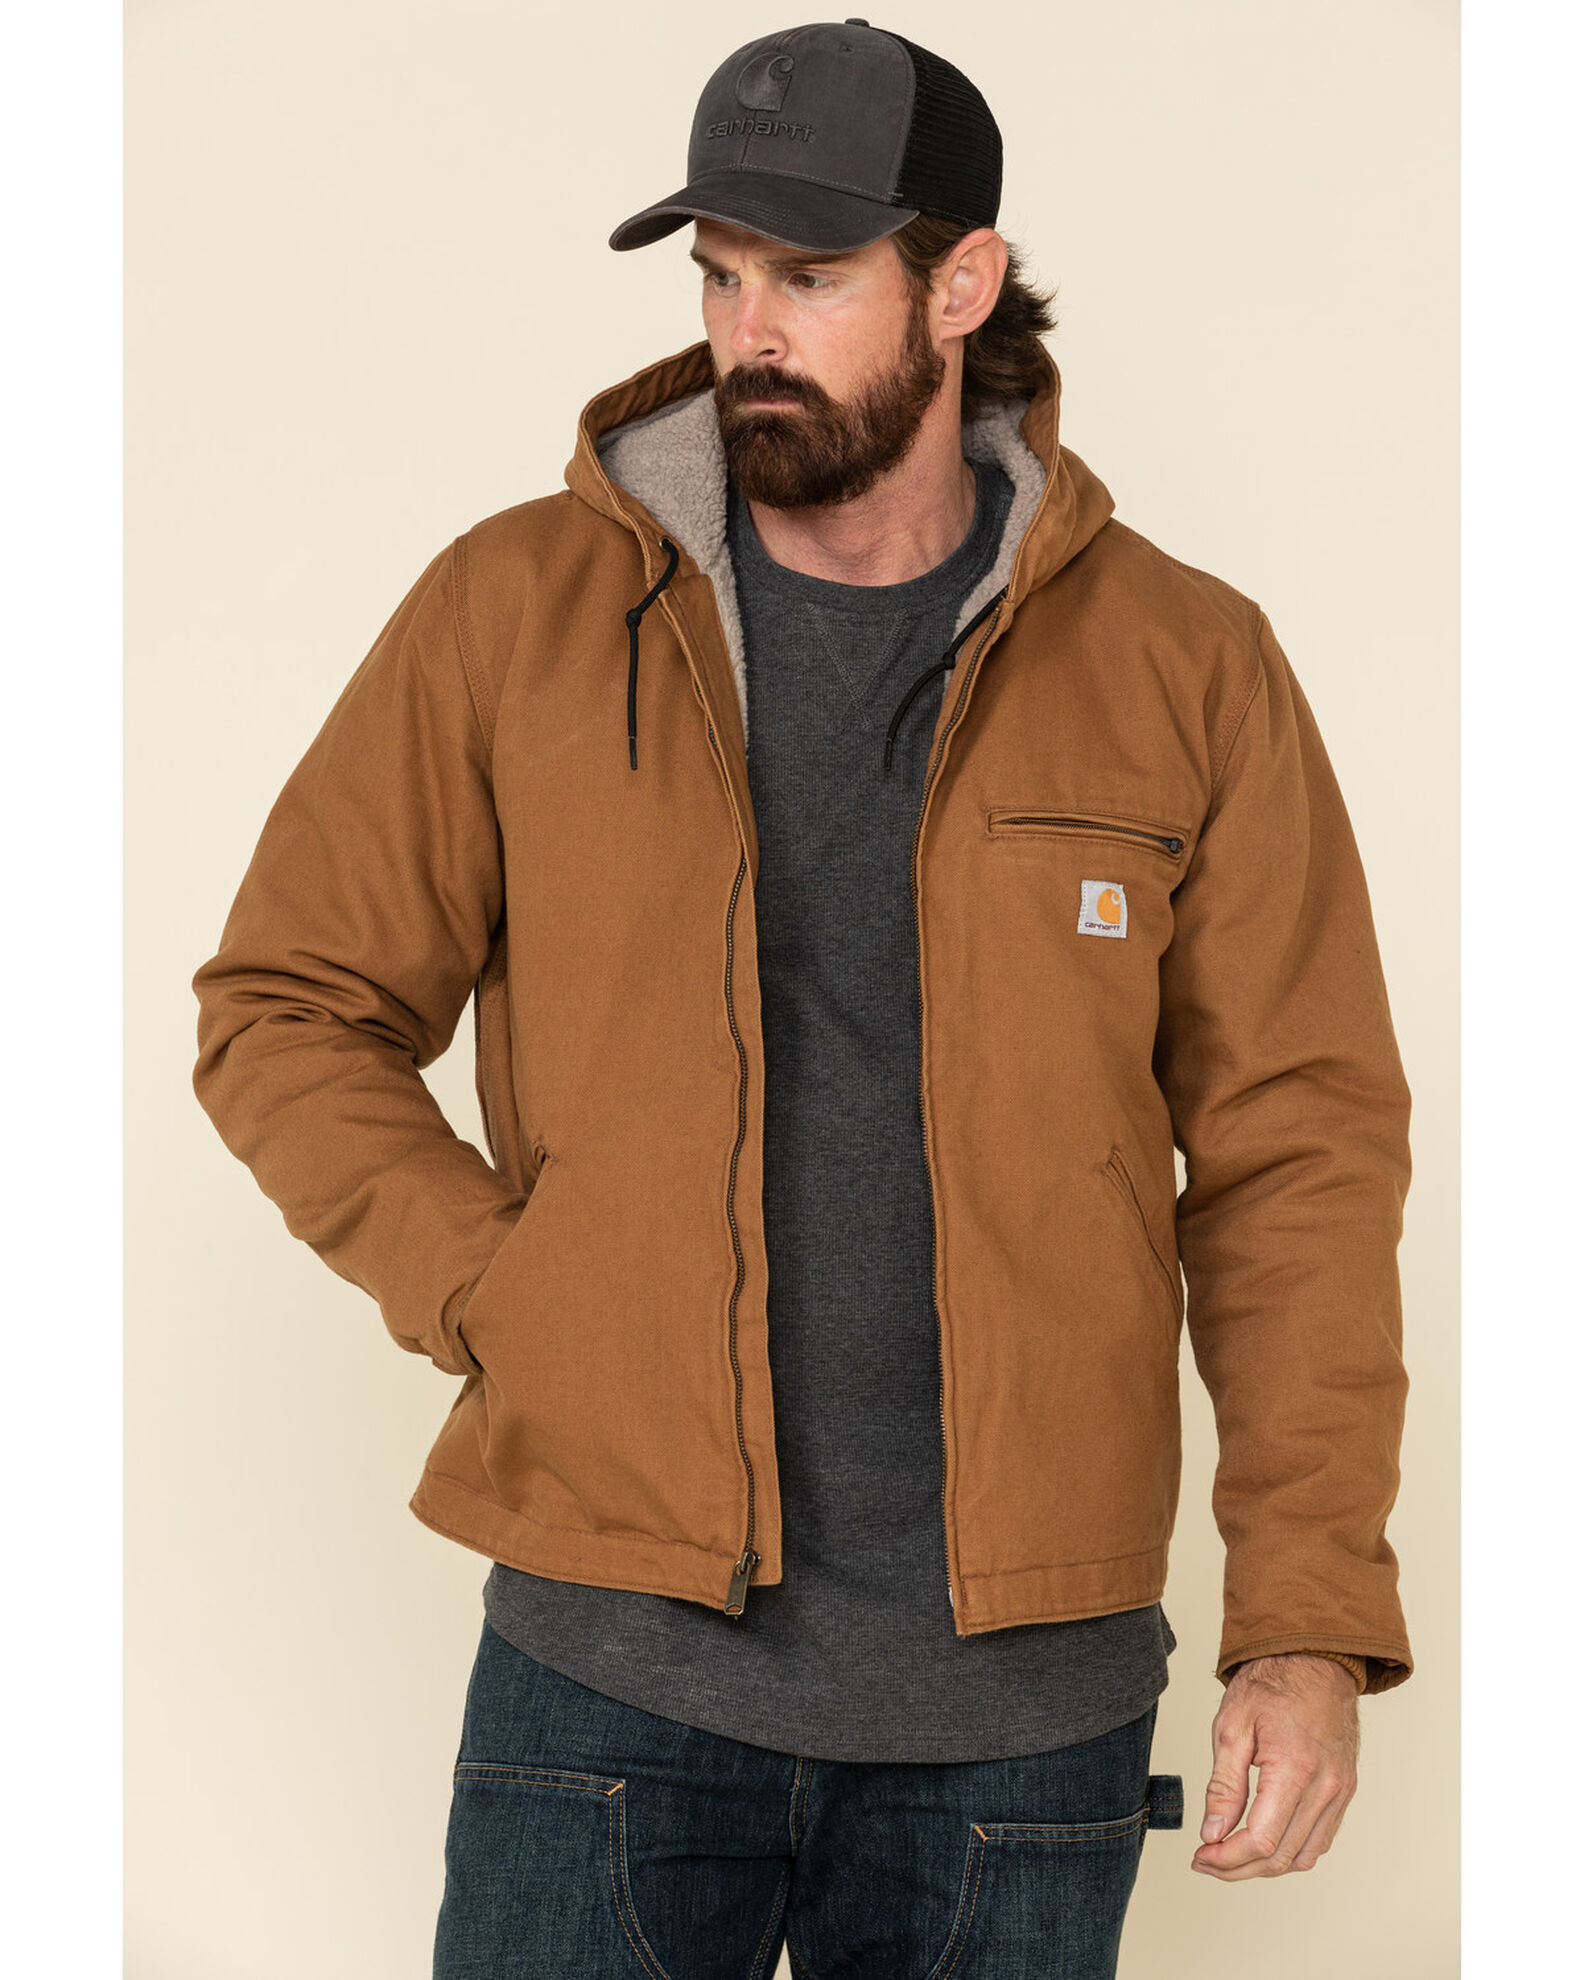 Carhartt Men's Washed Duck Sherpa Lined Hooded Work Jacket | Boot Barn